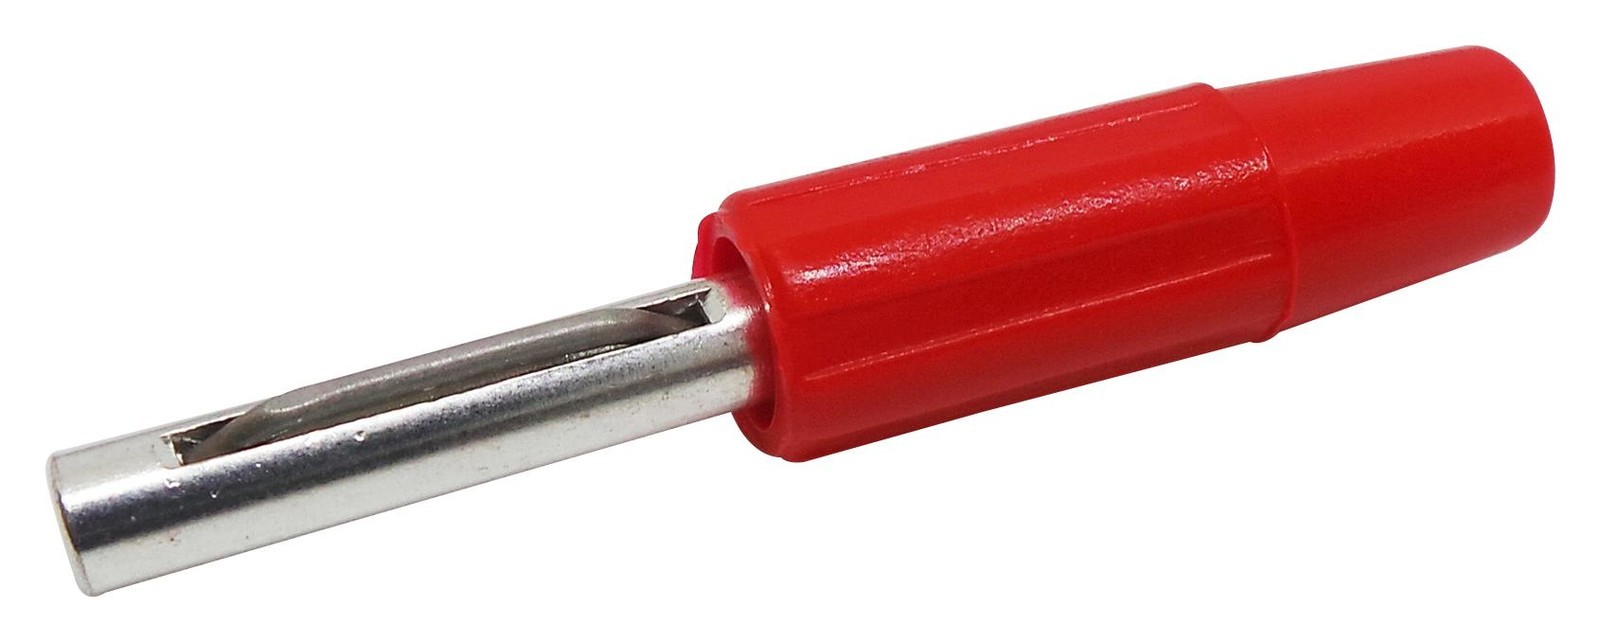 Deltron Components 550-0500 Banana Socket, 10A, 4mm, Cable, Red